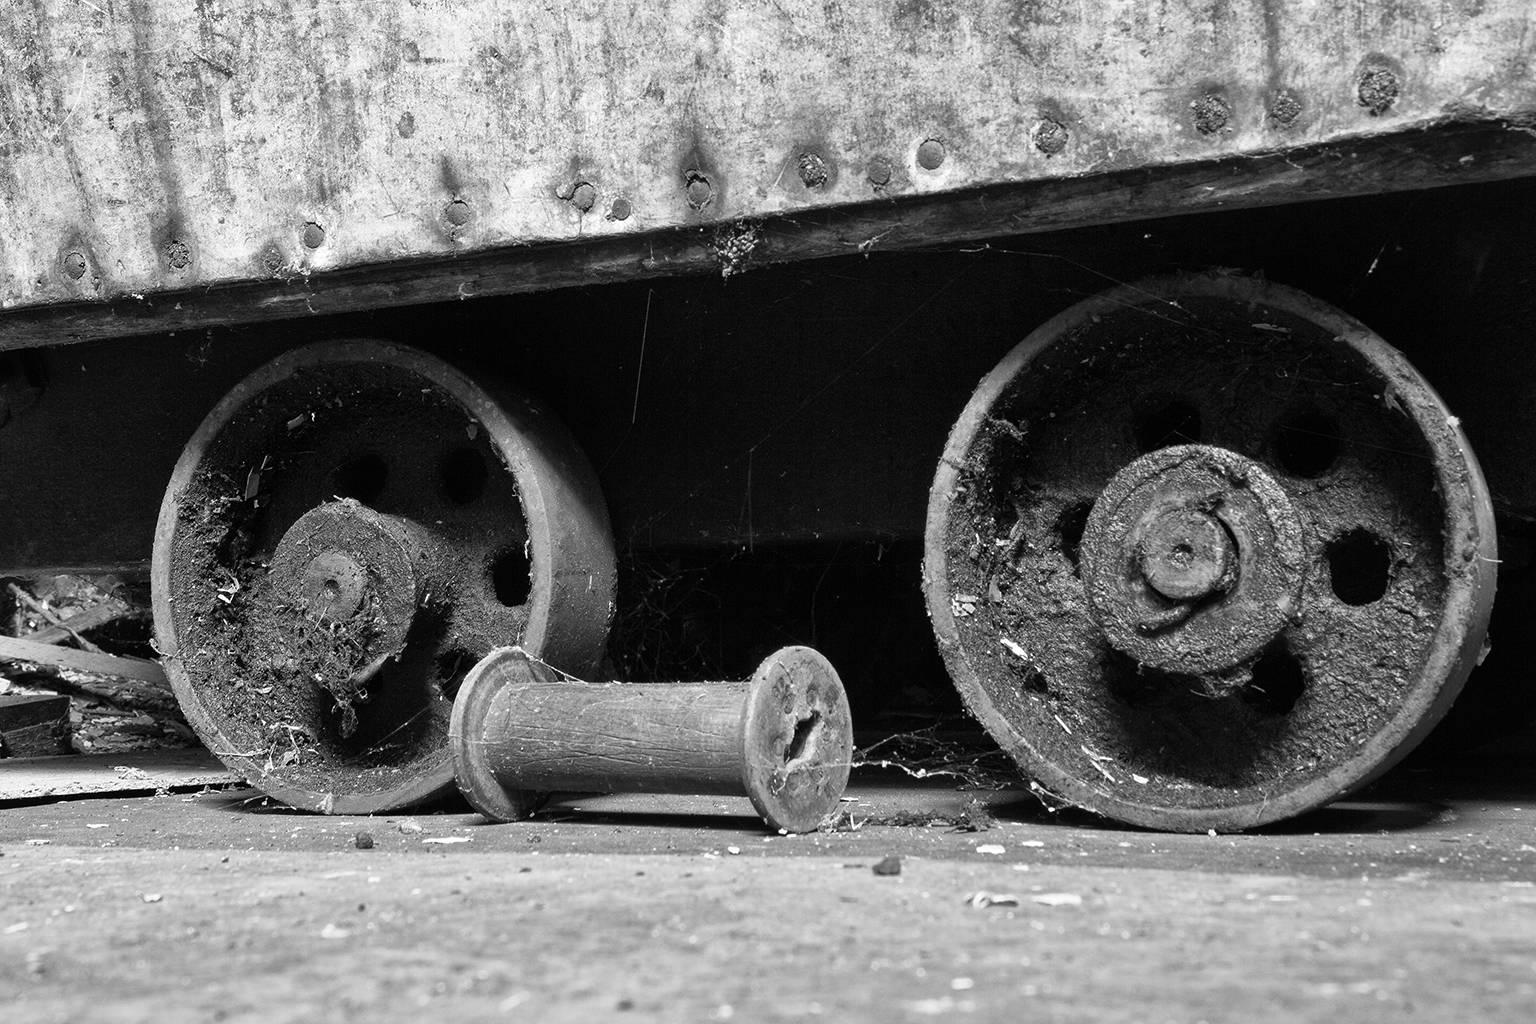 Rebecca Skinner Still-Life Photograph - "Wheels", black and white, abandoned, silk mill, industrial, vintage, photograph